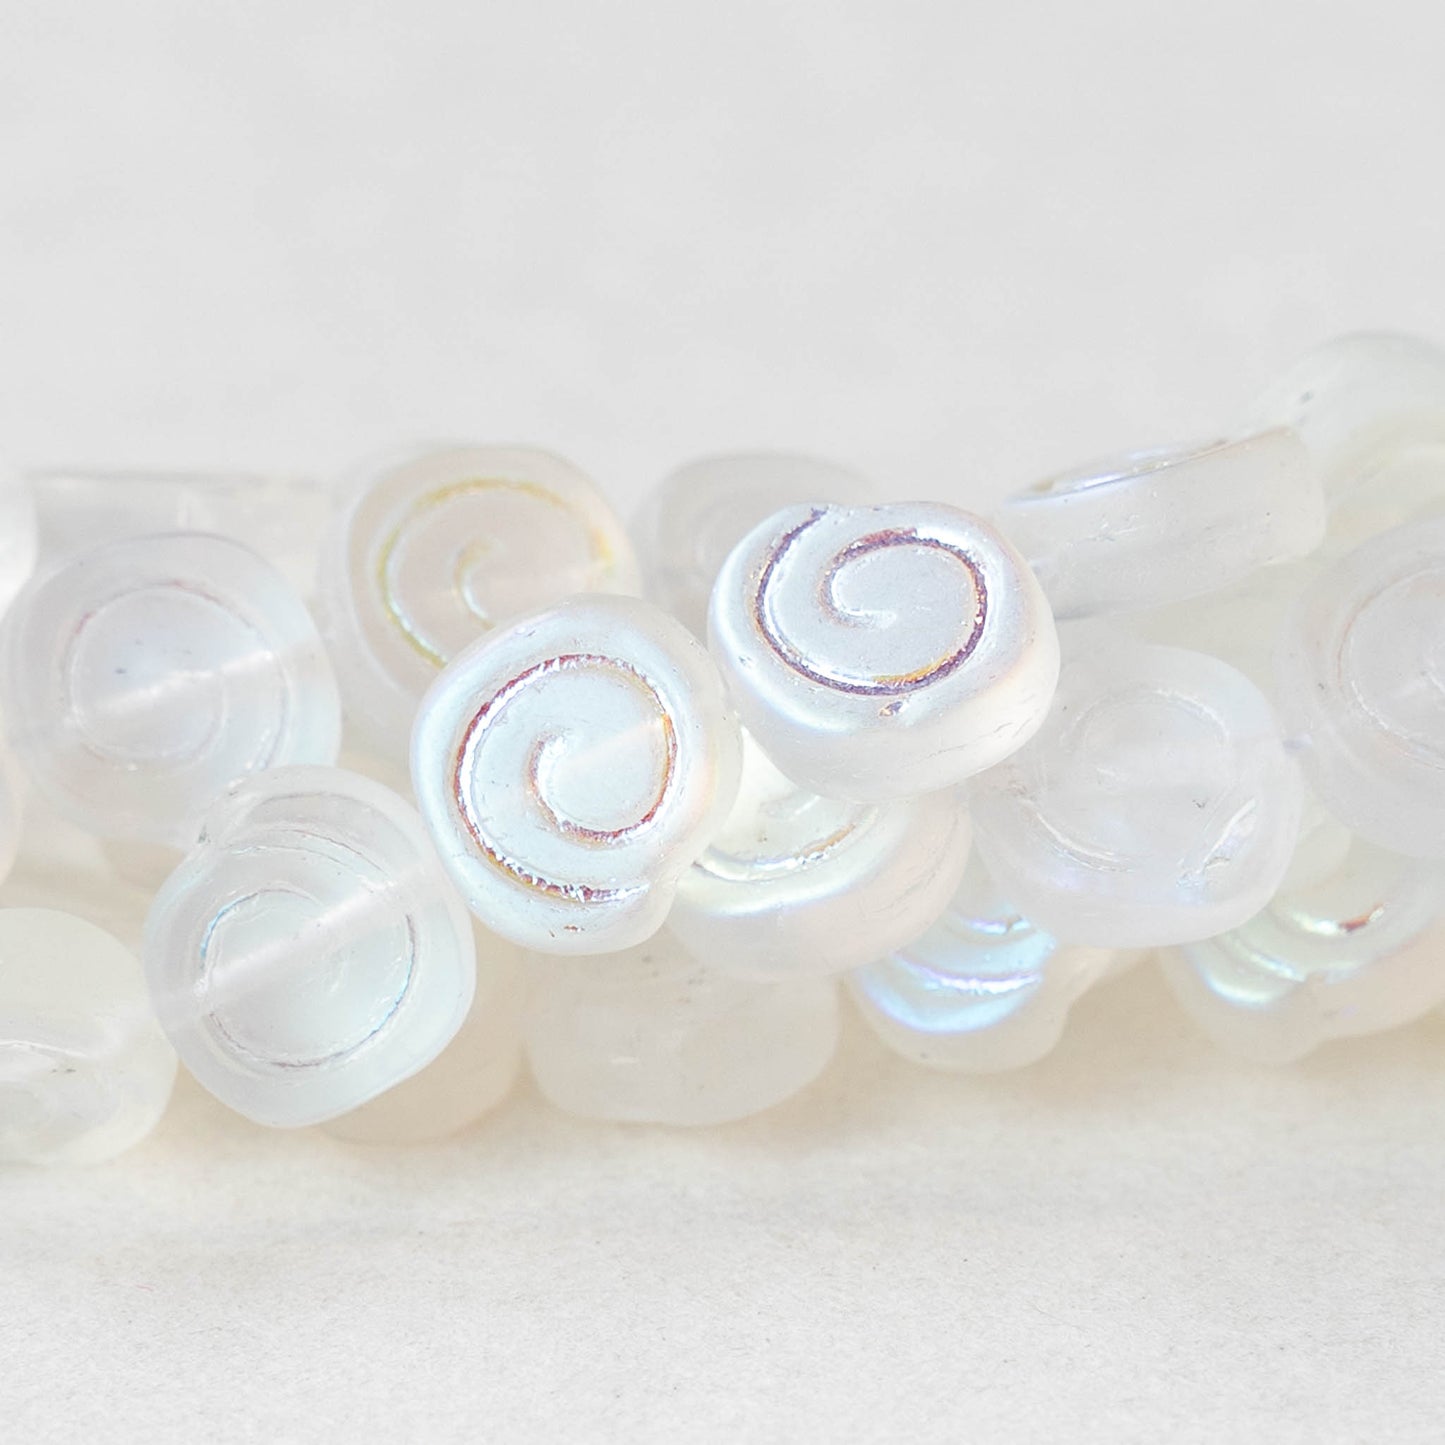 8mm Spiral Coin Beads - Crystal Matte AB - 25 Beads